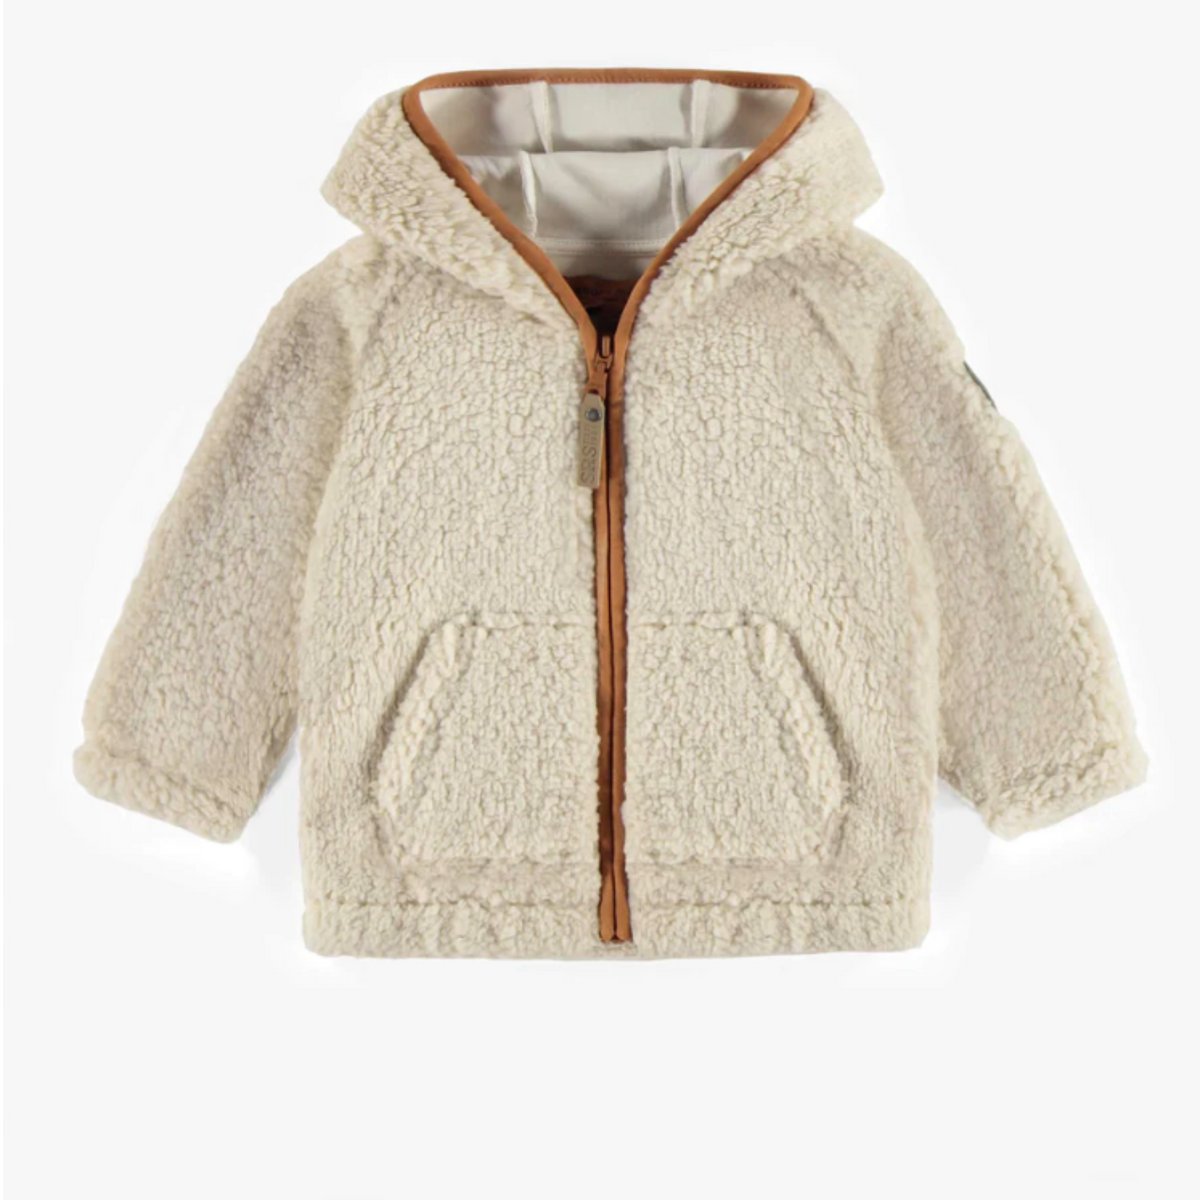 Ivory Sherpa Jacket with Hood, Baby